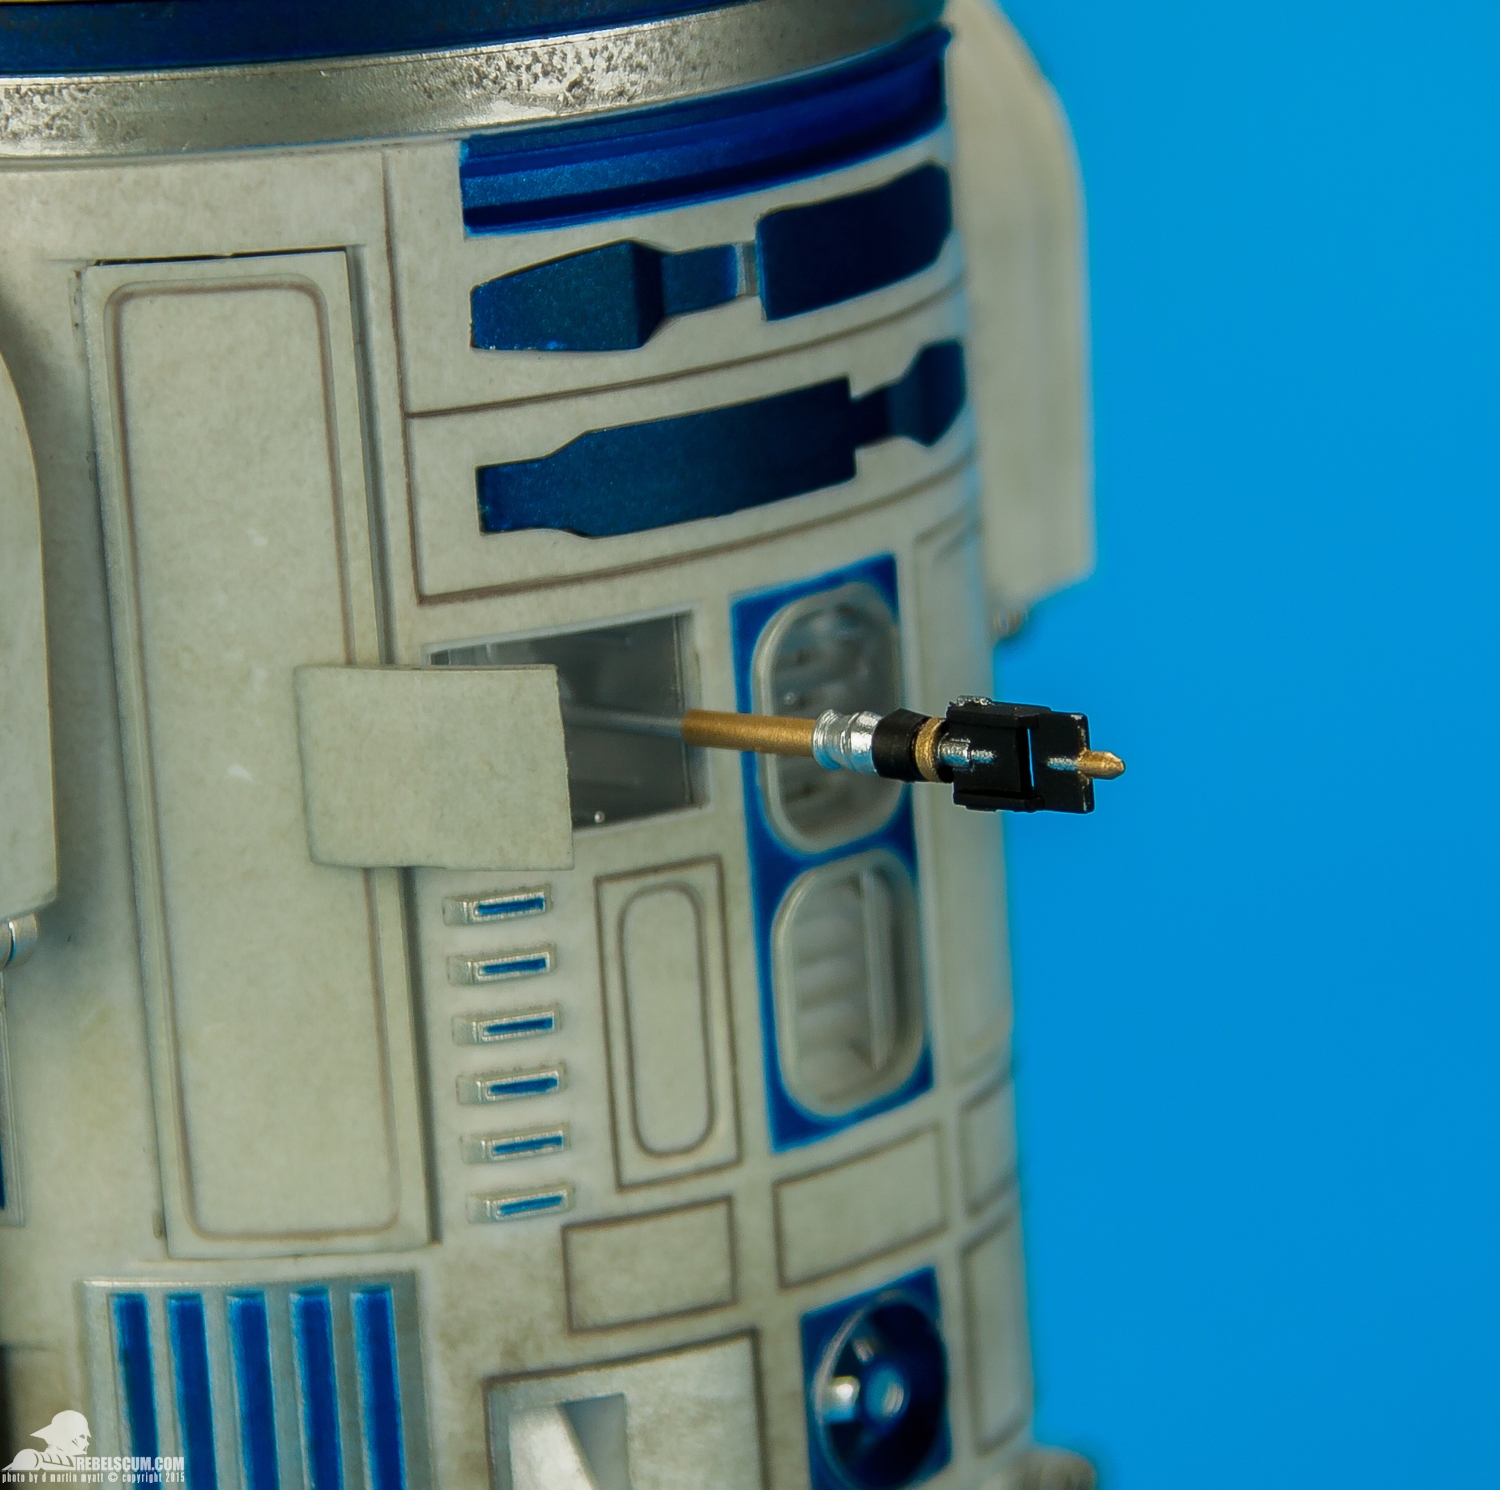 Sideshow-Collectibles-R2-D2-Sixth-Scale-Figure-Review-034.jpg